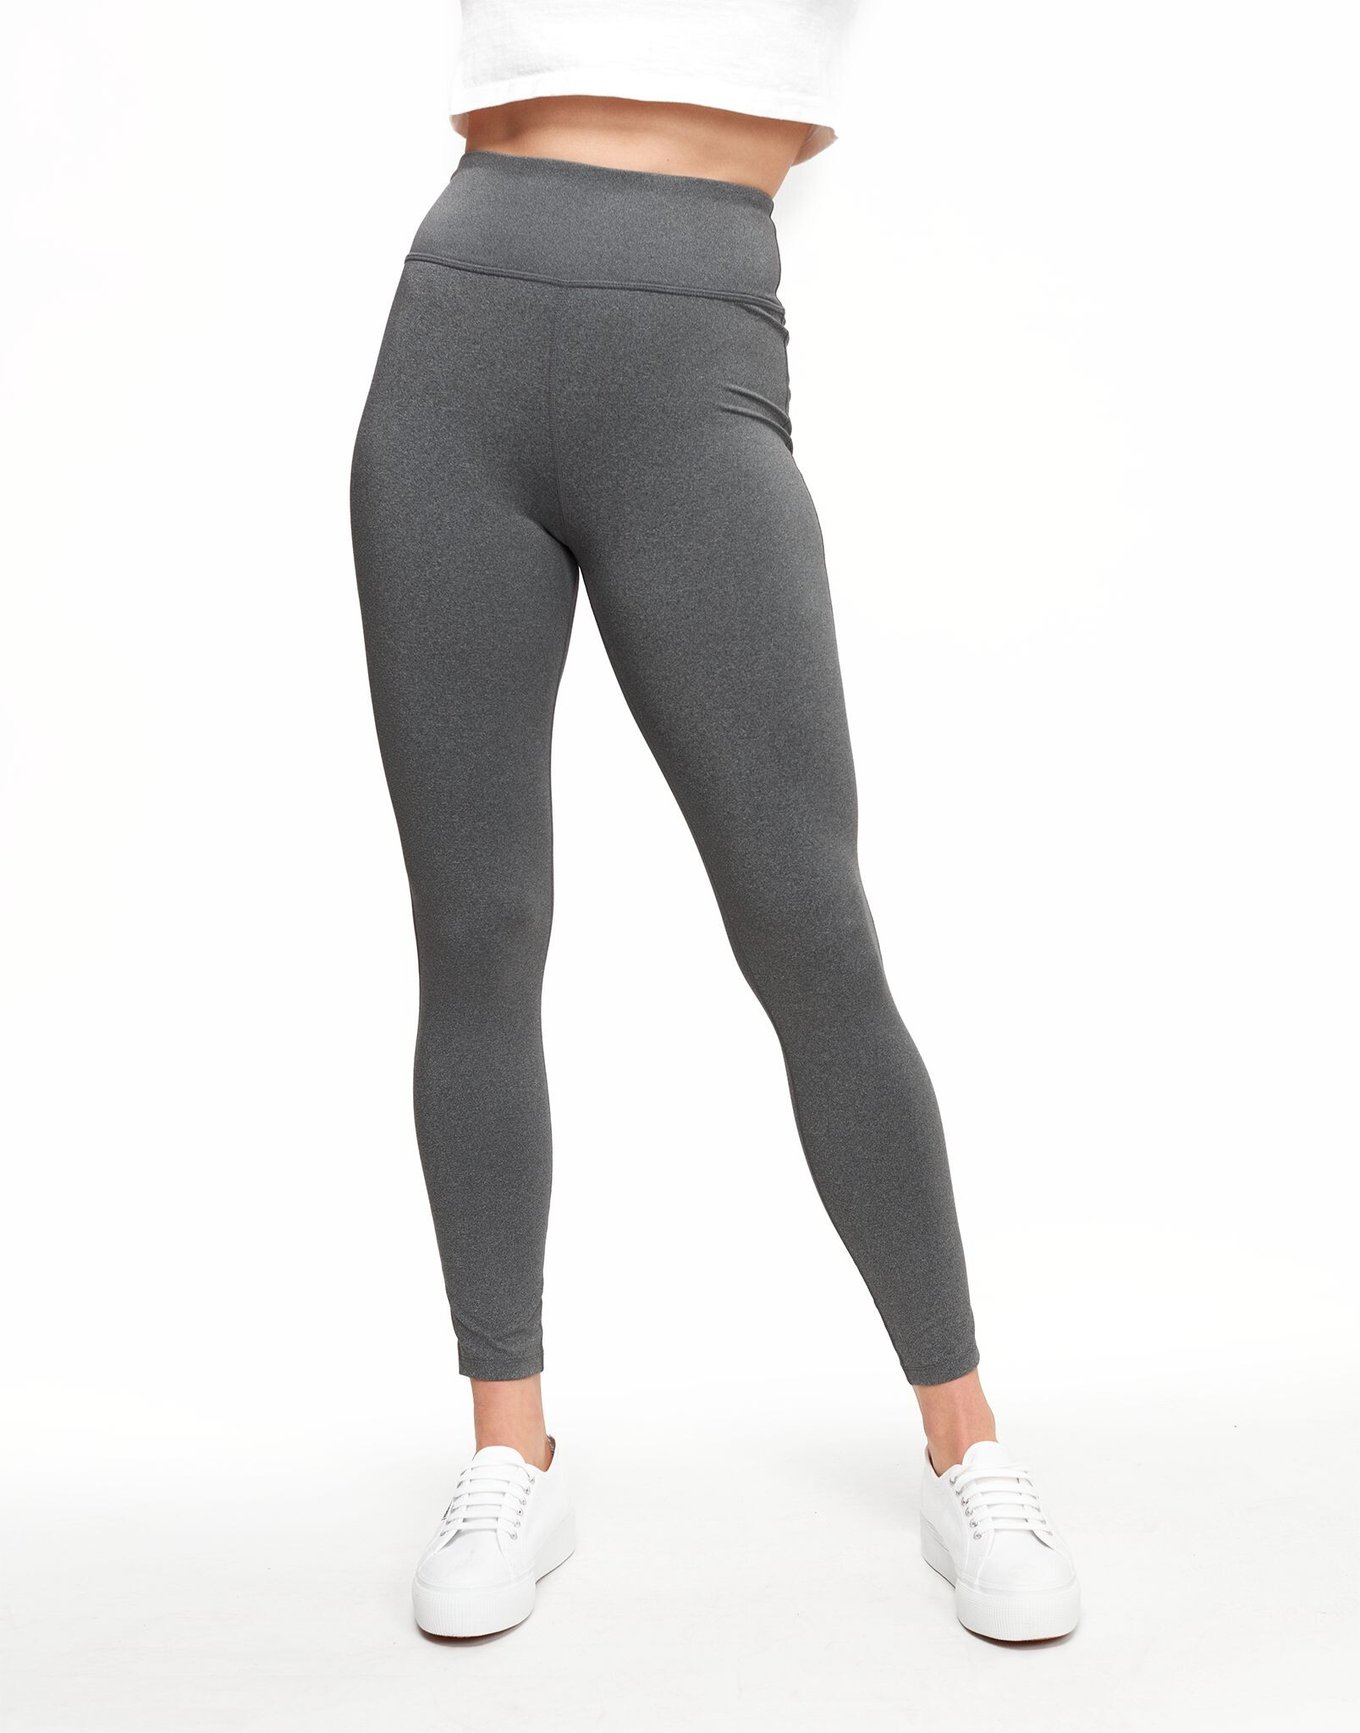 Rae Mode Essential Legging - Ice Grey – Simply South Outfitters